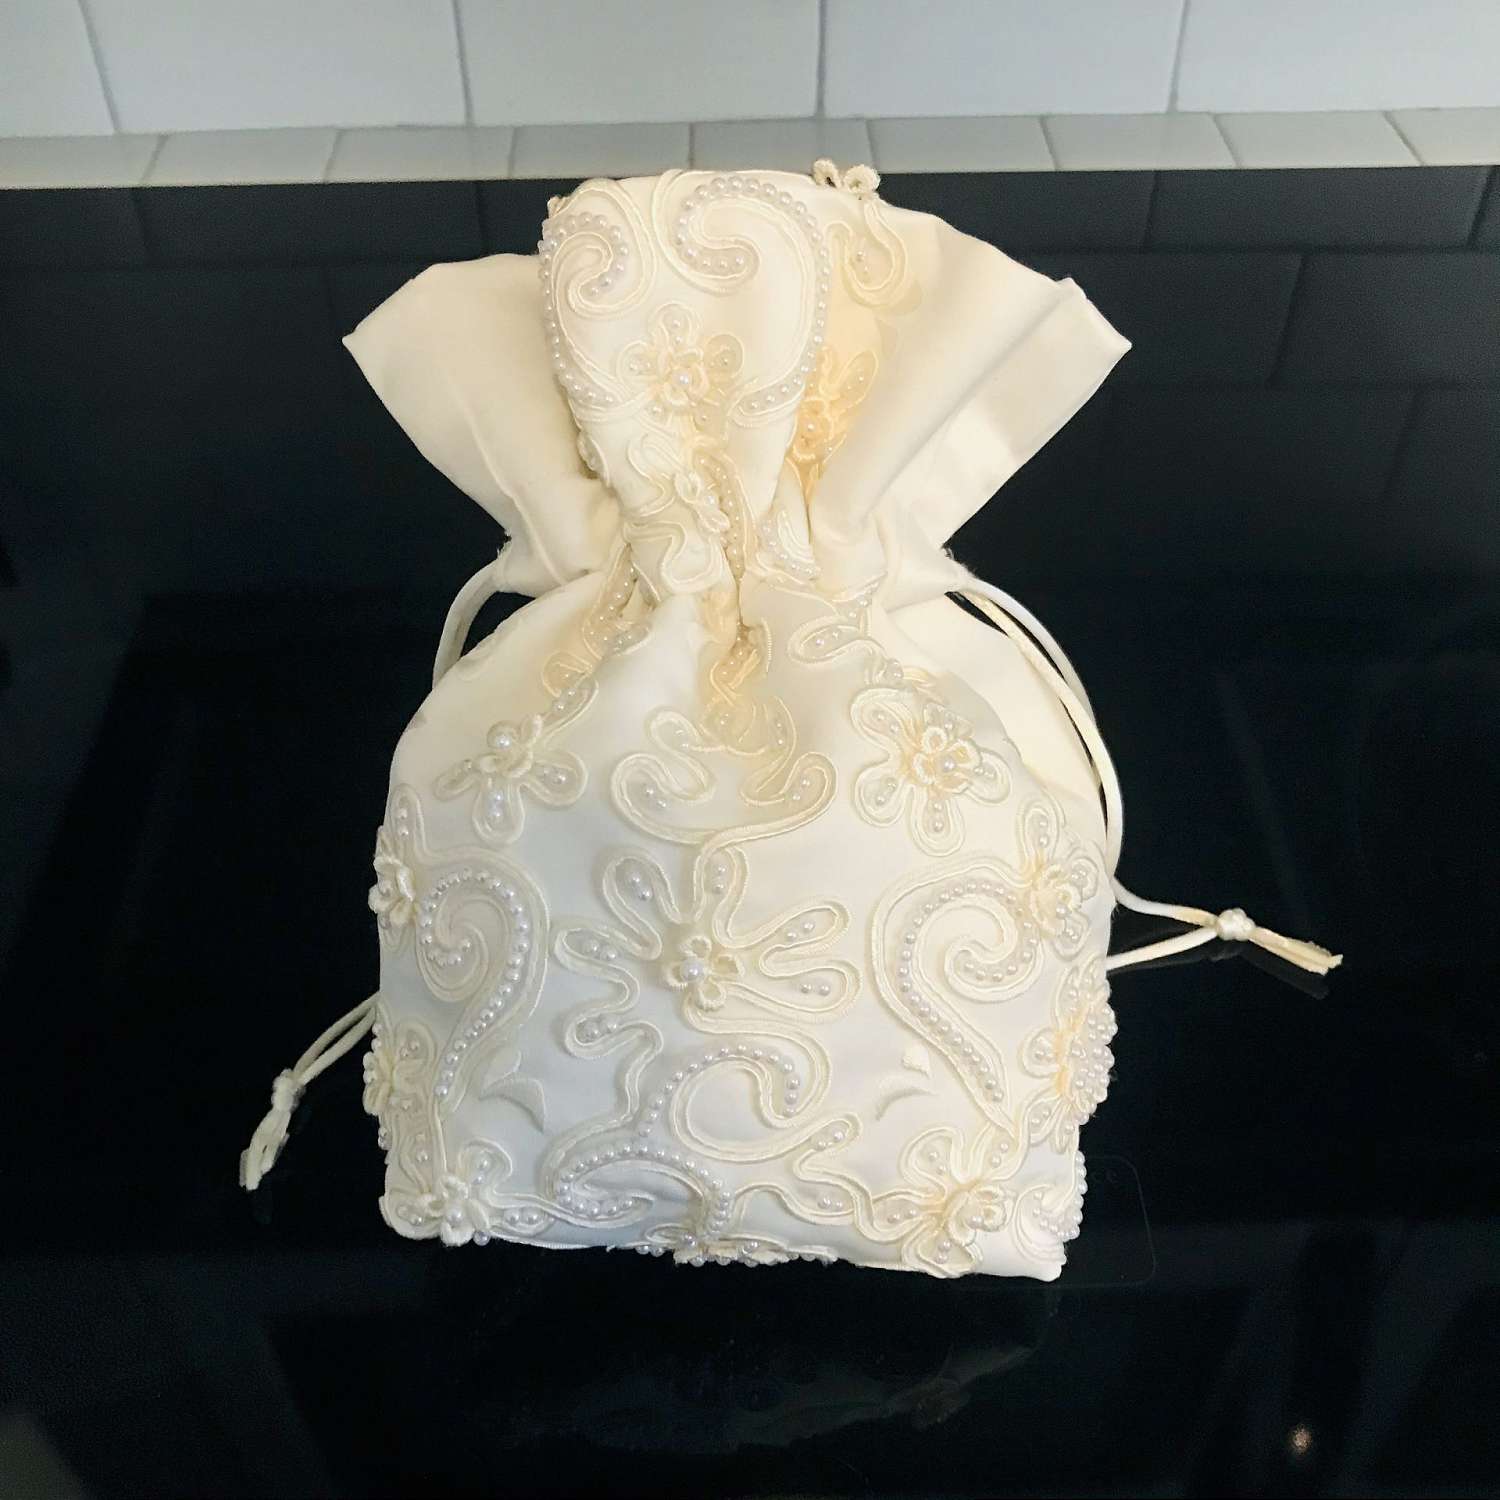 Beautiful Hand Made Satin Bridal Wedding Purse Dance Bag Made Of Wedding Dress Jewelry Bag Pearl Beaded Drawstring Travel Bag White On White 5df029d31 Scaled 